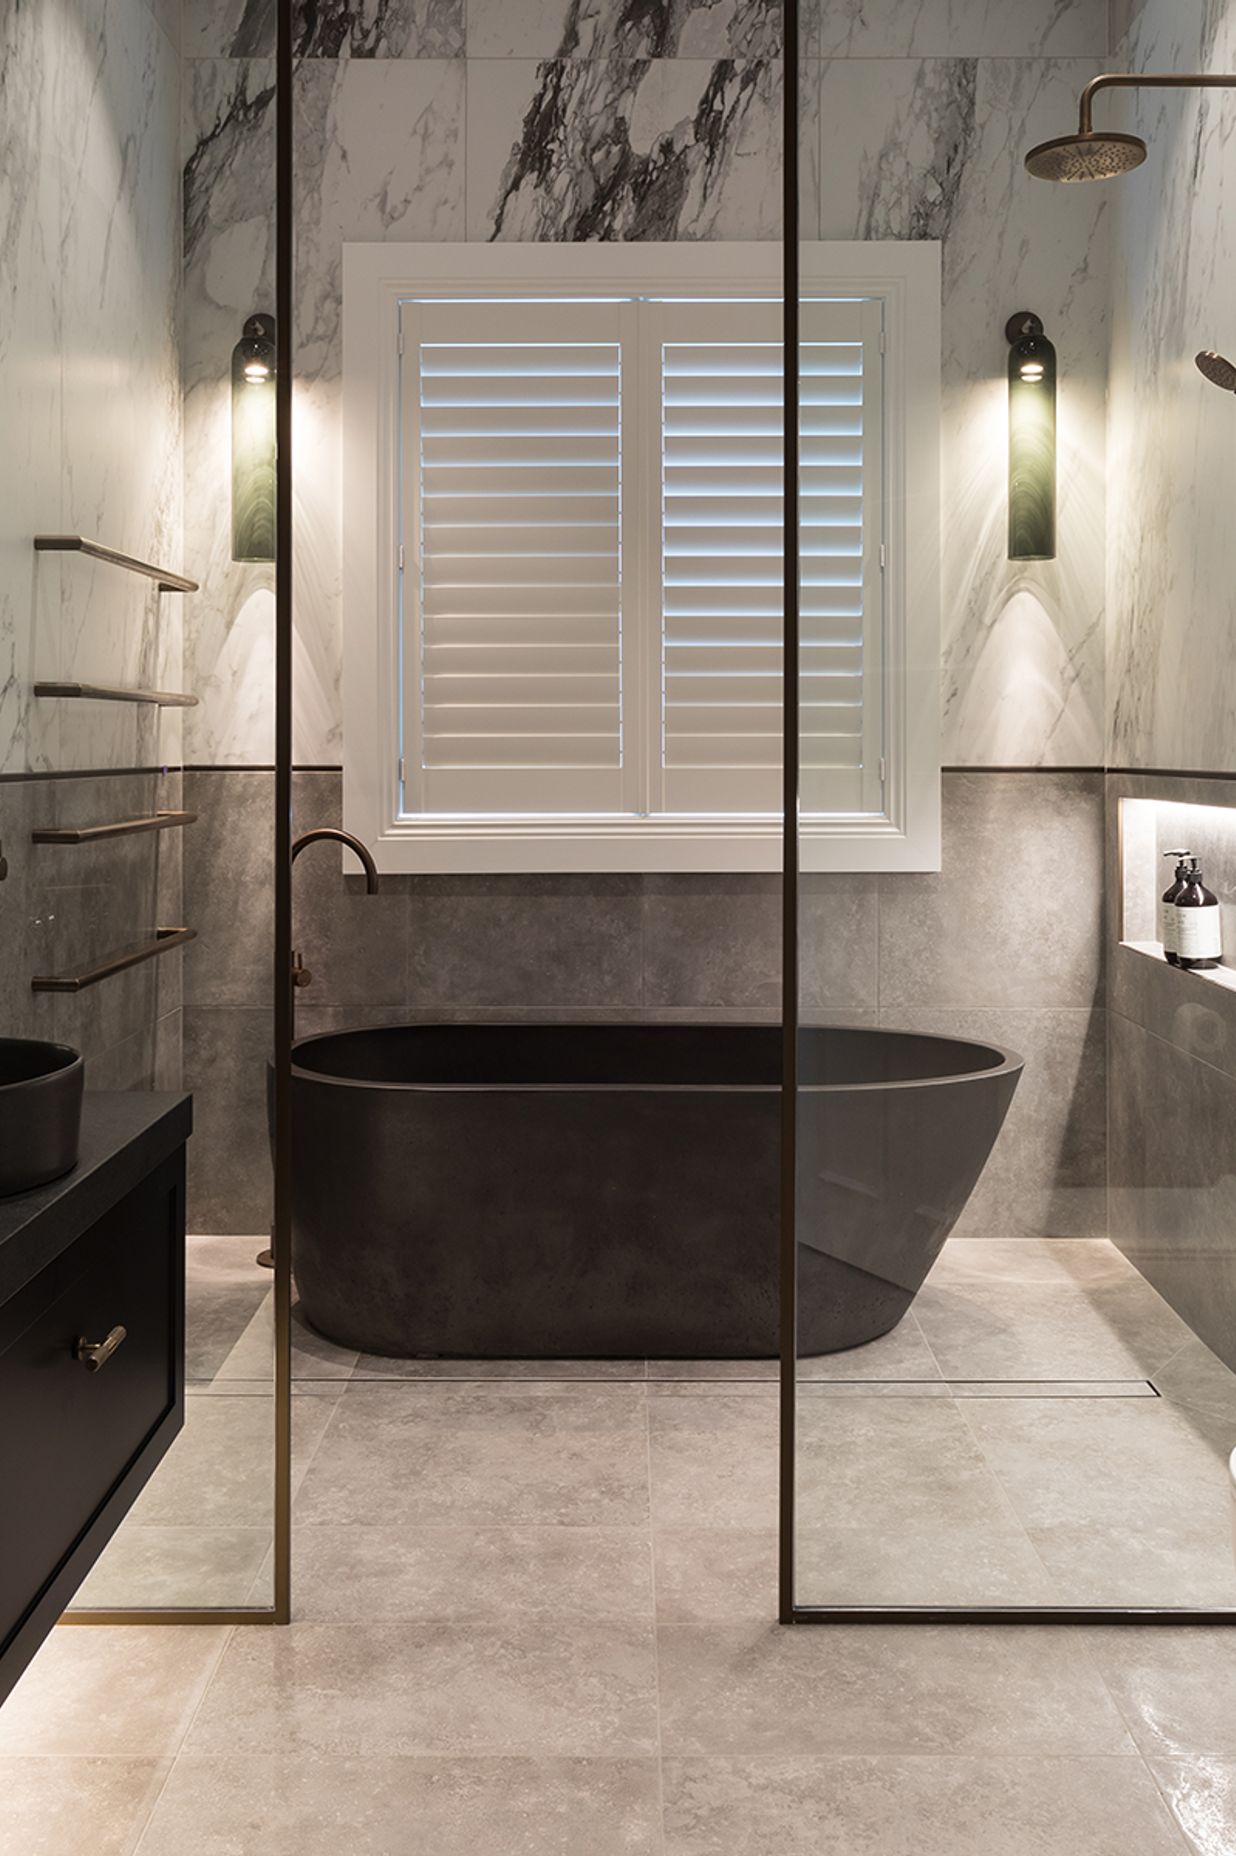 In this residential bathroom, Sticks + Stones Design used Quantum's large-format Italian Carrara 900 x 1800mm tiles from the popular Bianco collection.